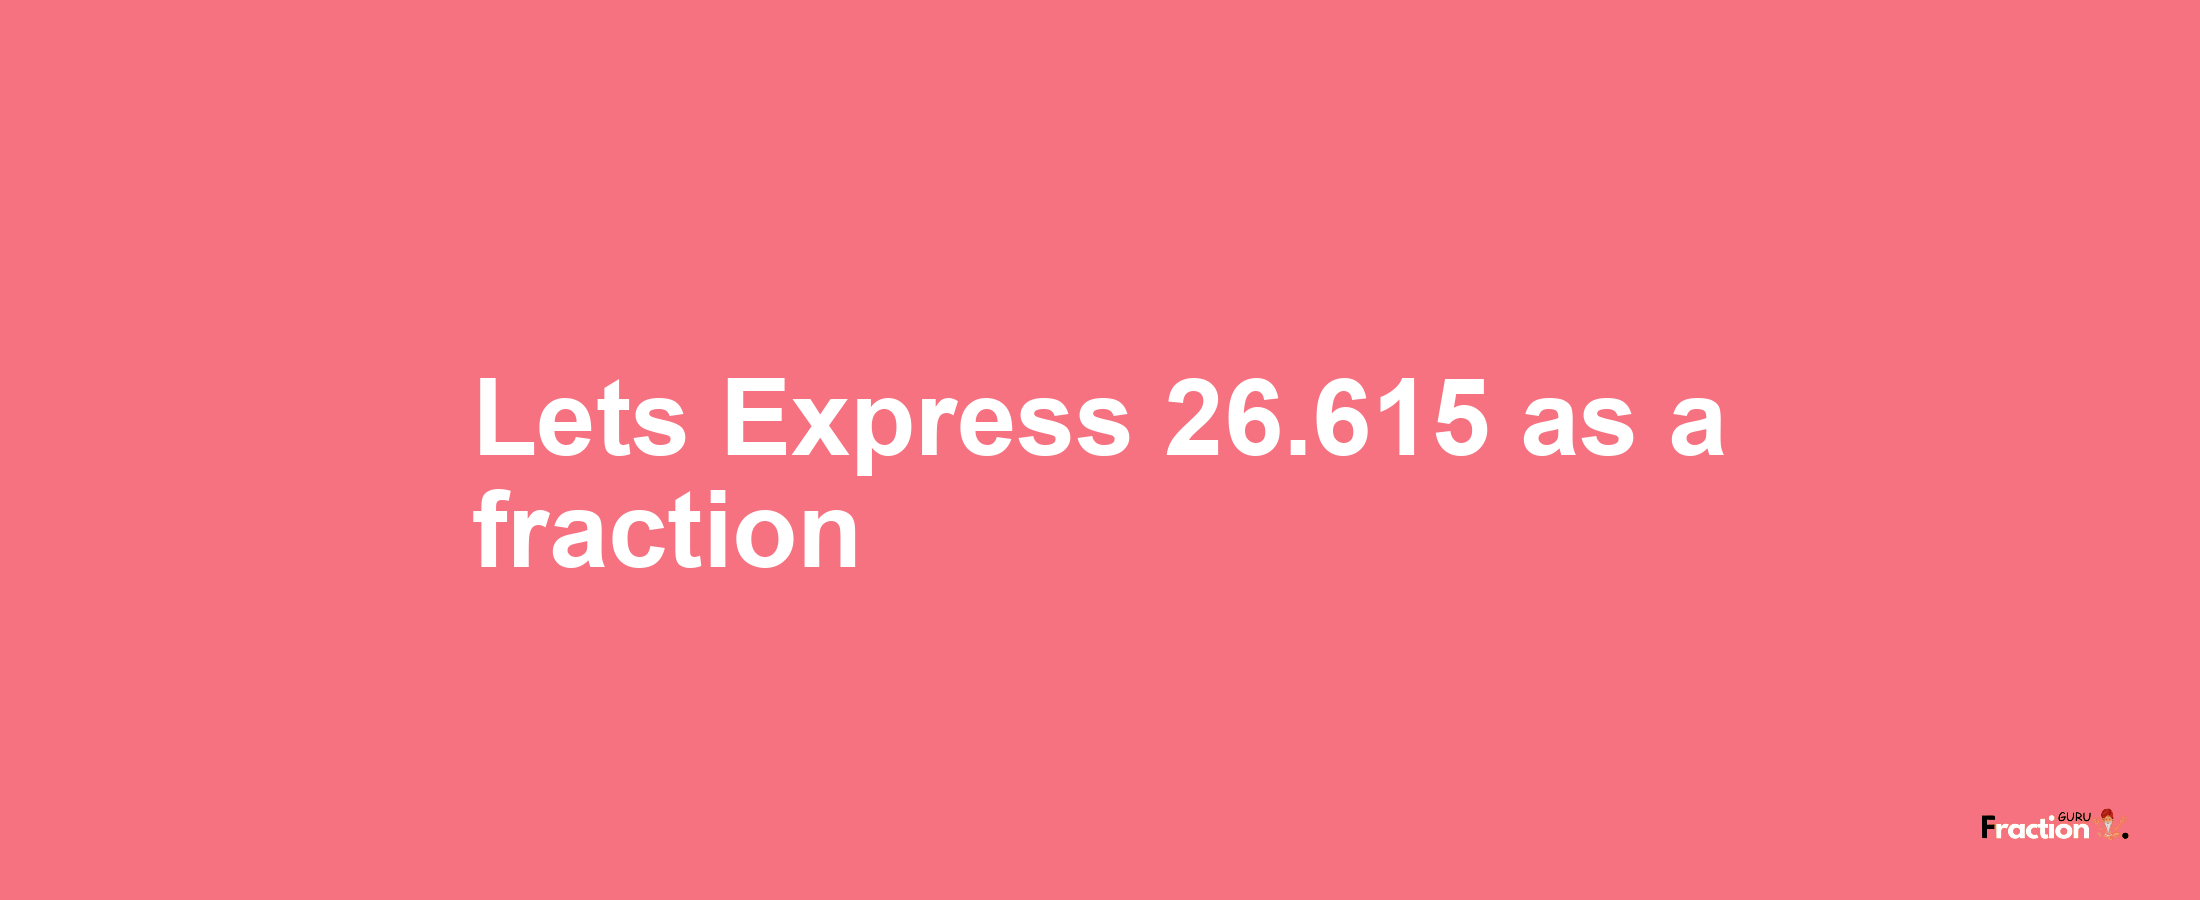 Lets Express 26.615 as afraction